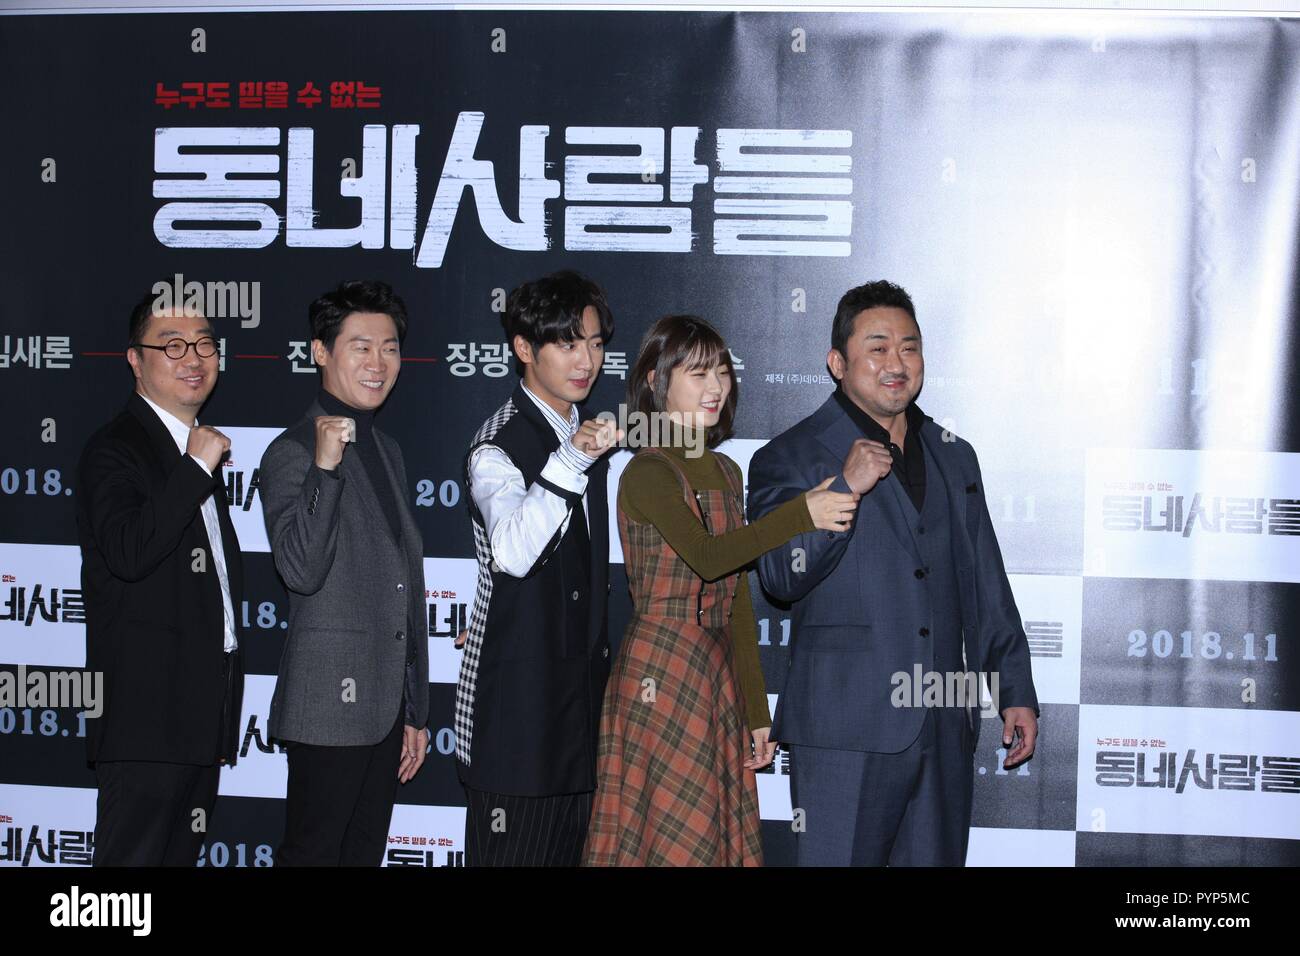 Seoul, Korea. 29th Oct, 2018. Ma Tong-seok, Kim Saeron, Lee Sang Yeob etc.  attended the press premiere of 'The Villagers' in Seoul, Korea on 29th  October 2018.(China and Korea Rights Out) Credit: